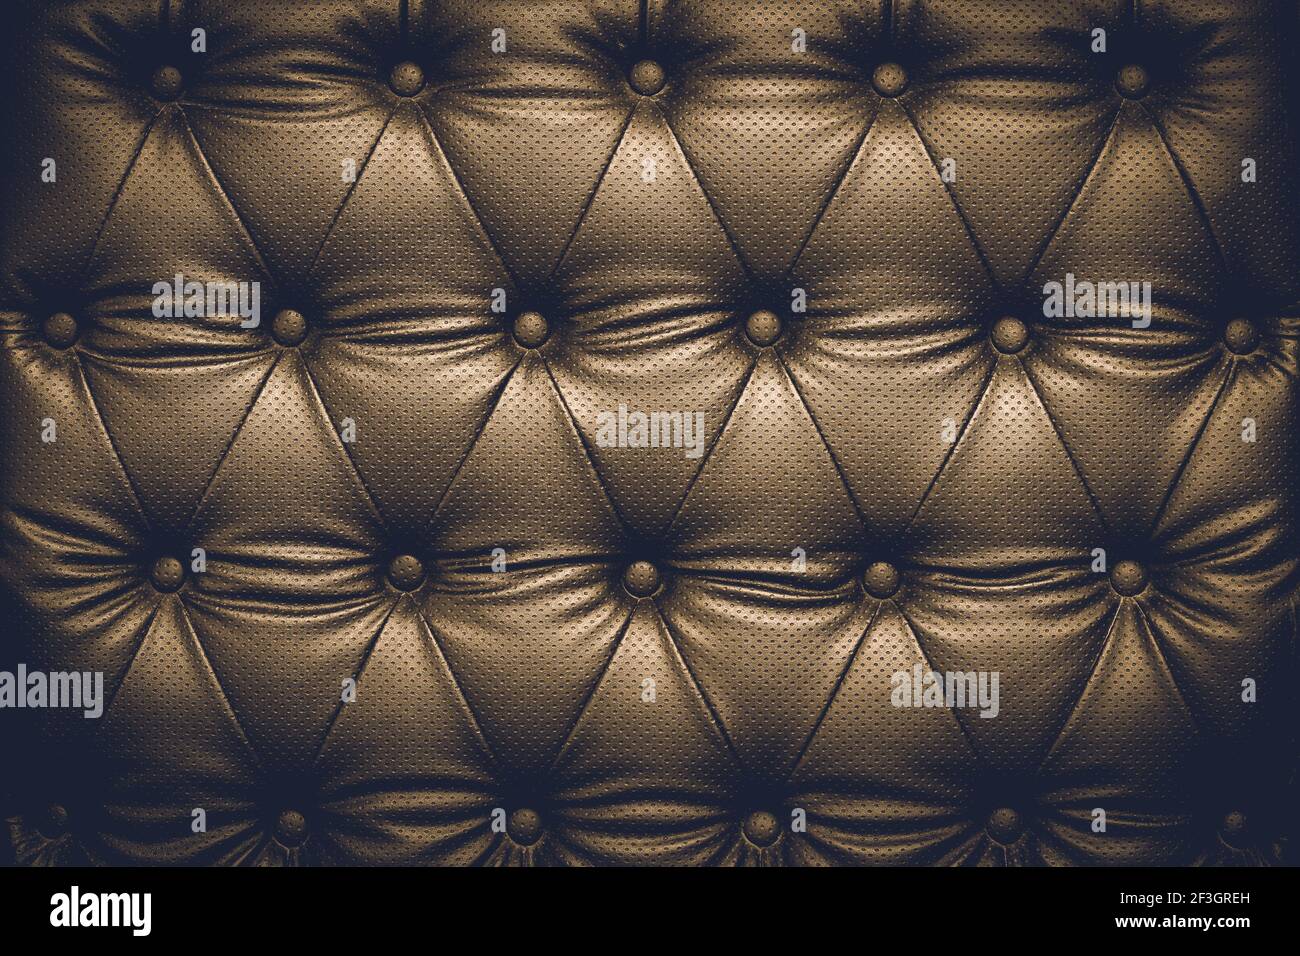 Black leather texture background with buttoned pattern Stock Photo